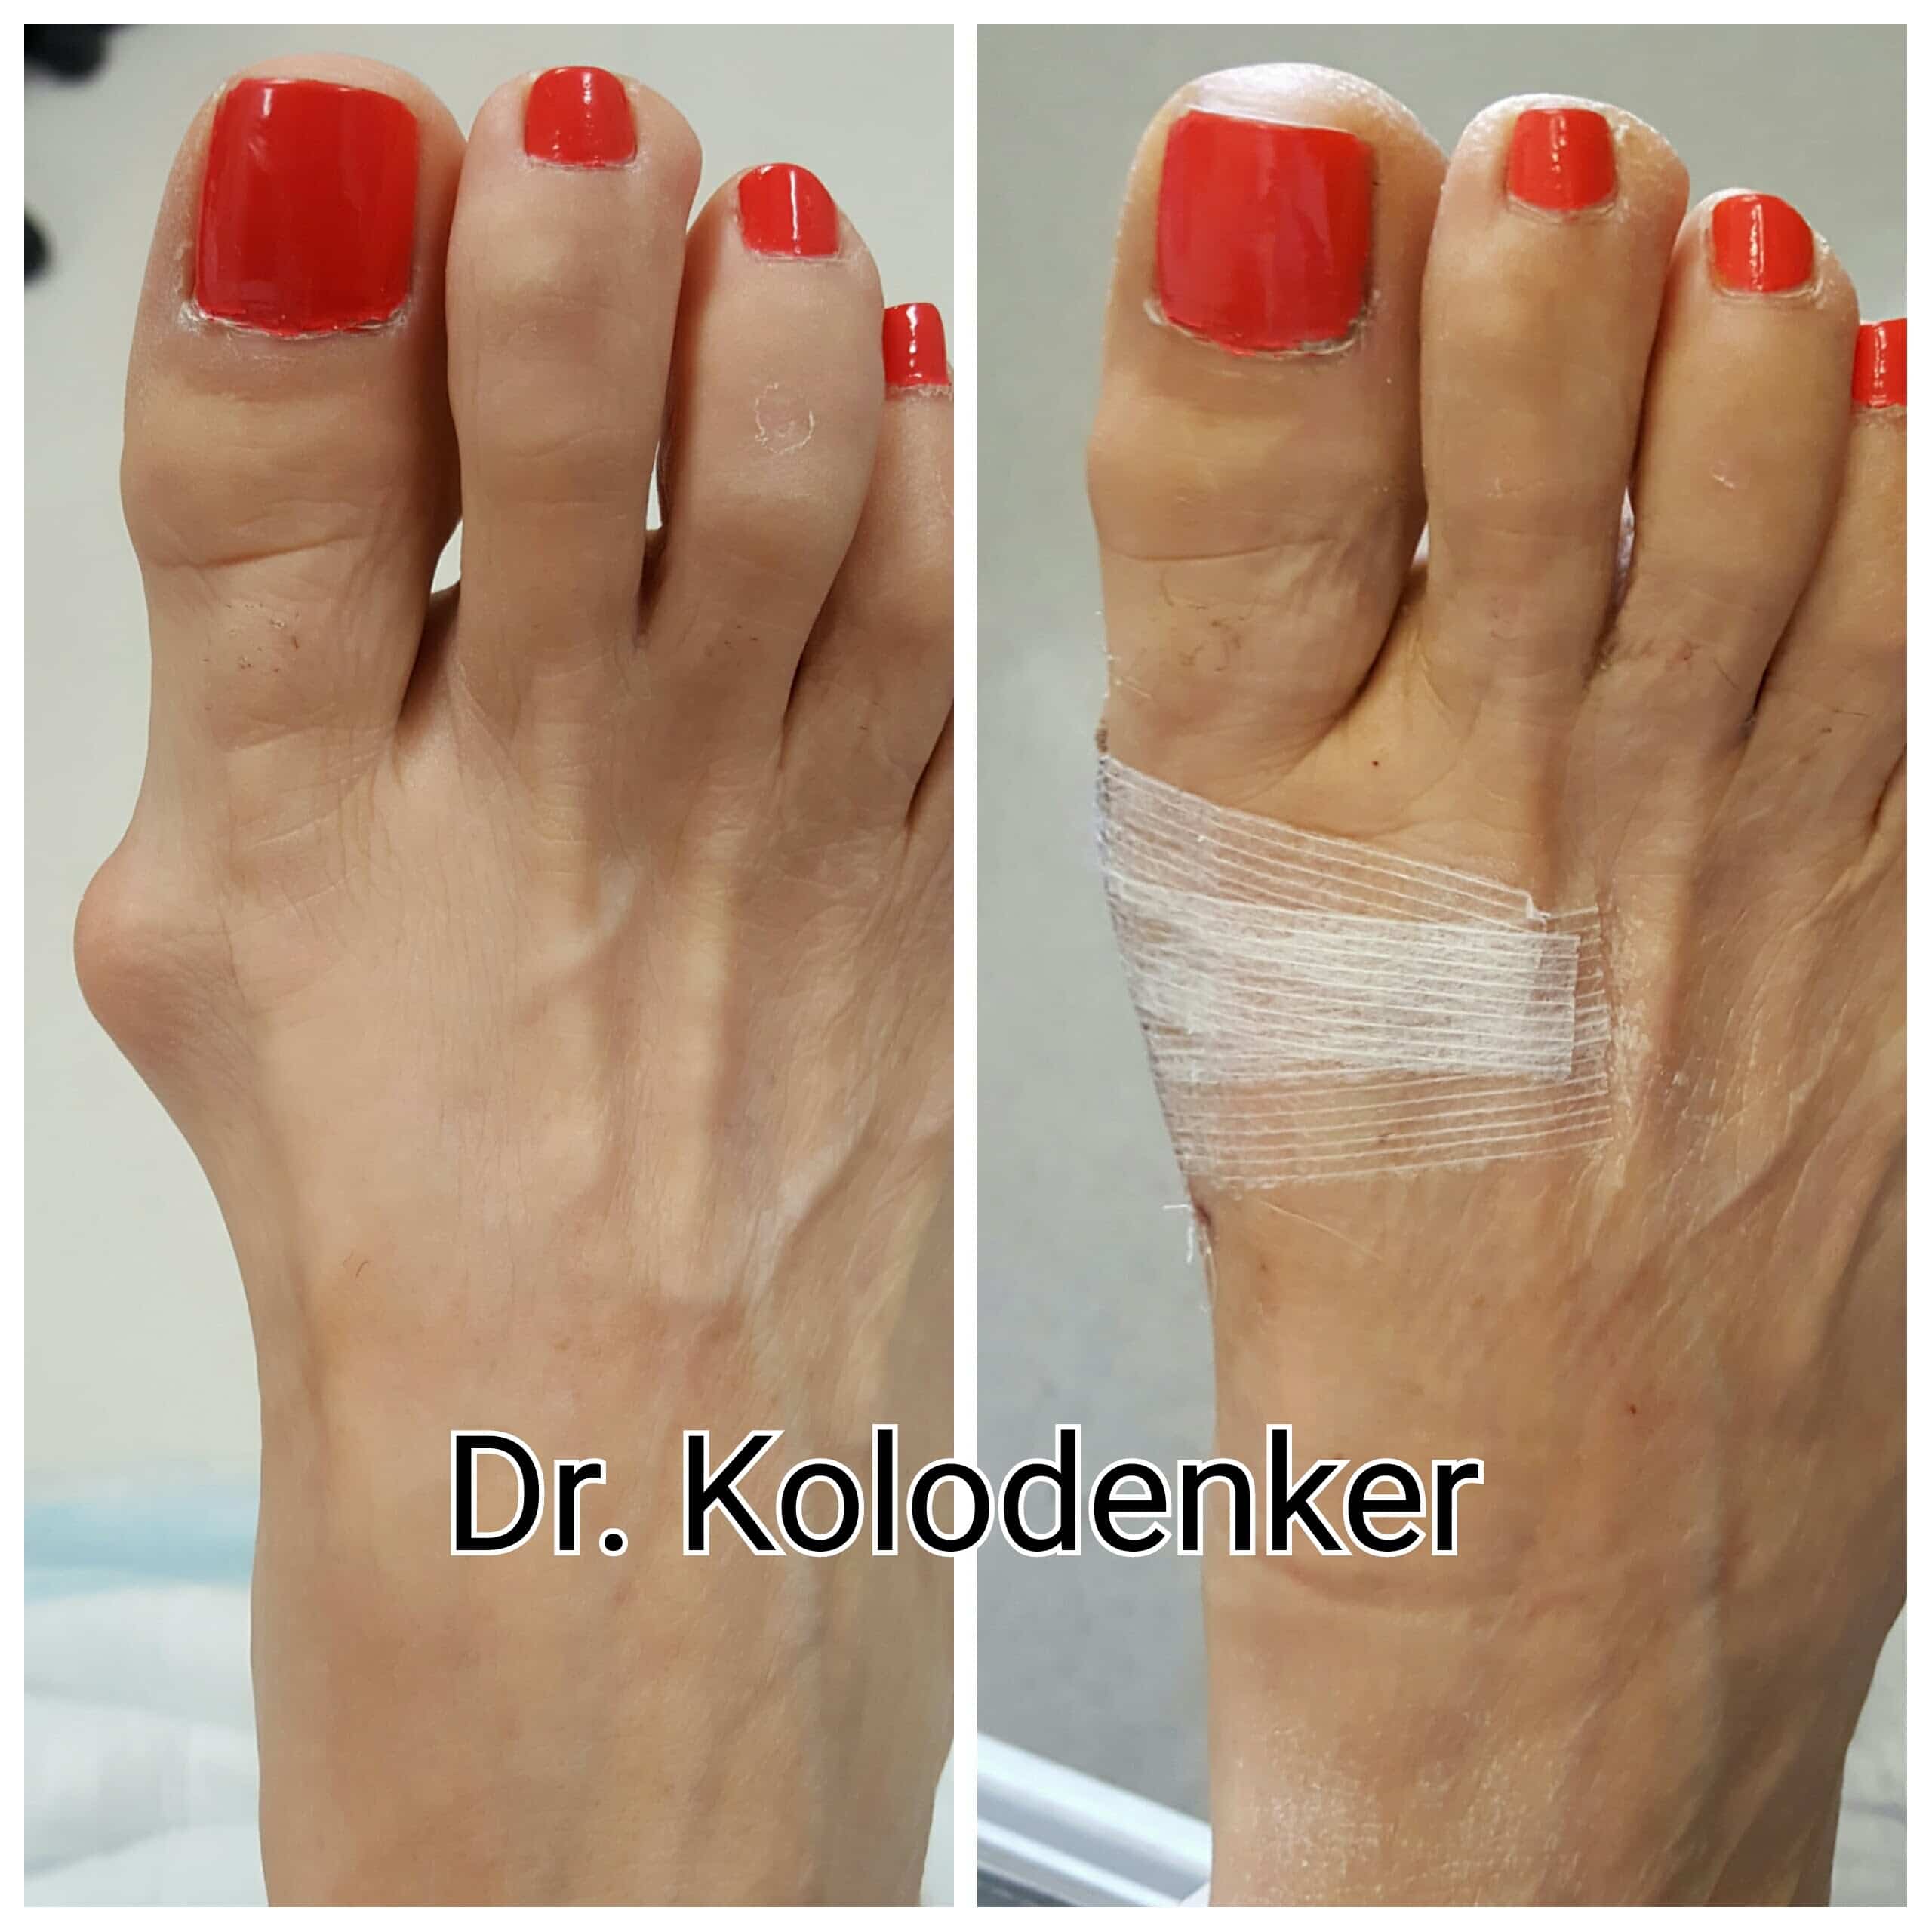 Before and After Bunion Surgery Pictures.